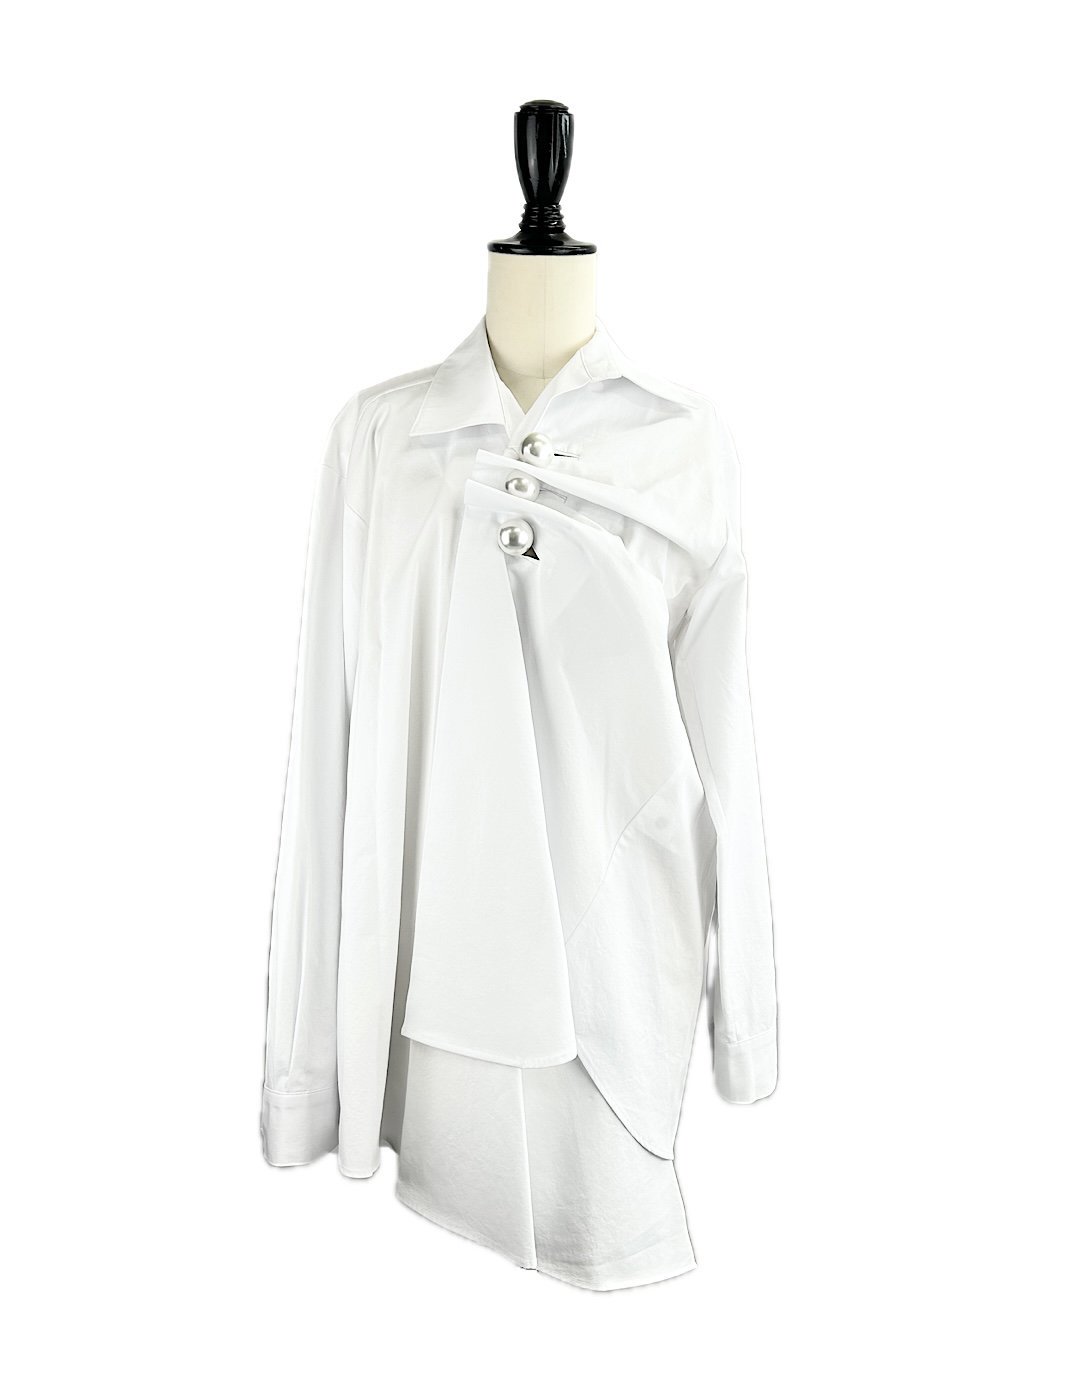 <img class='new_mark_img1' src='https://img.shop-pro.jp/img/new/icons6.gif' style='border:none;display:inline;margin:0px;padding:0px;width:auto;' />KIMHEKIM / PEARL BUTTONS DRAPED SHIRT